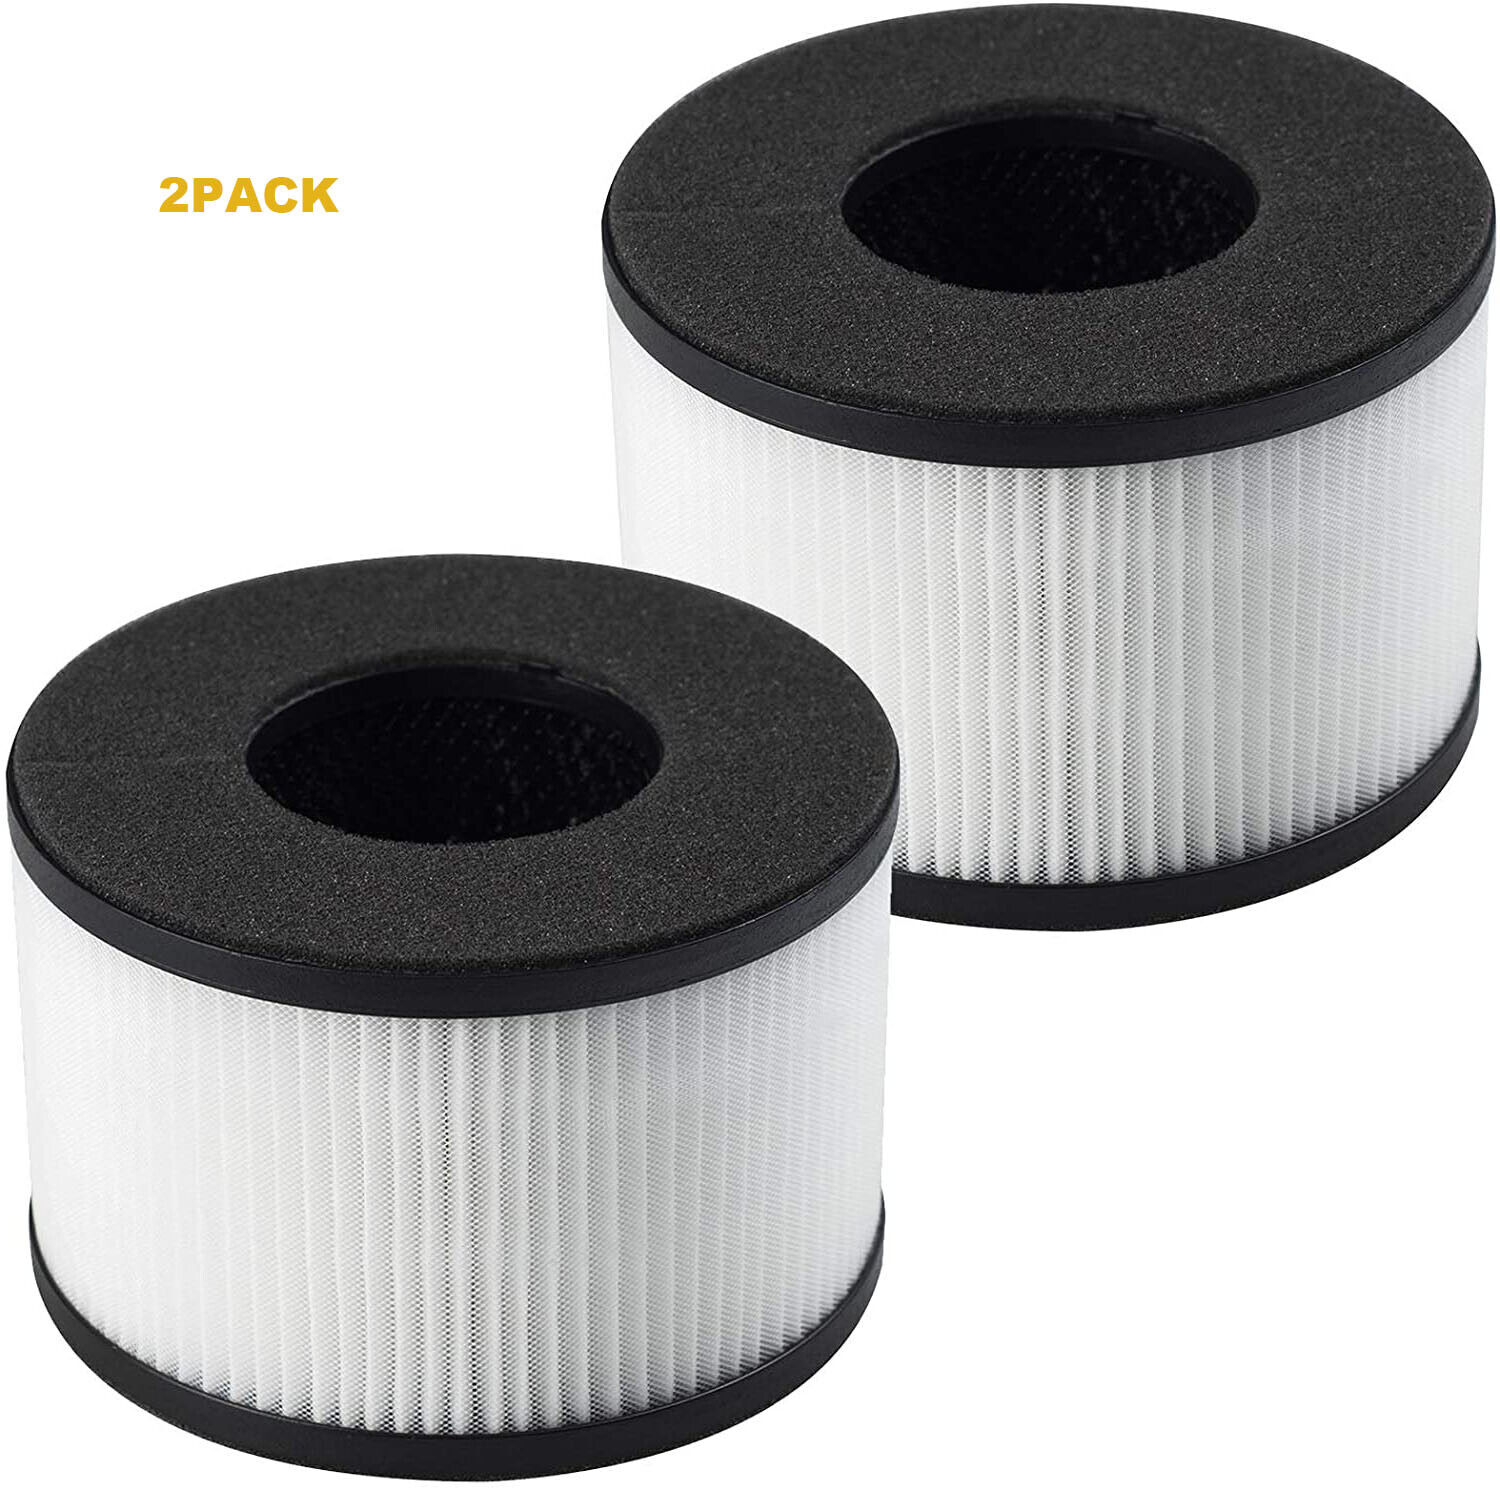 BS-03 HEPA Filter Replacement for PARTU Air Purifier Upgraded H13 Filtration